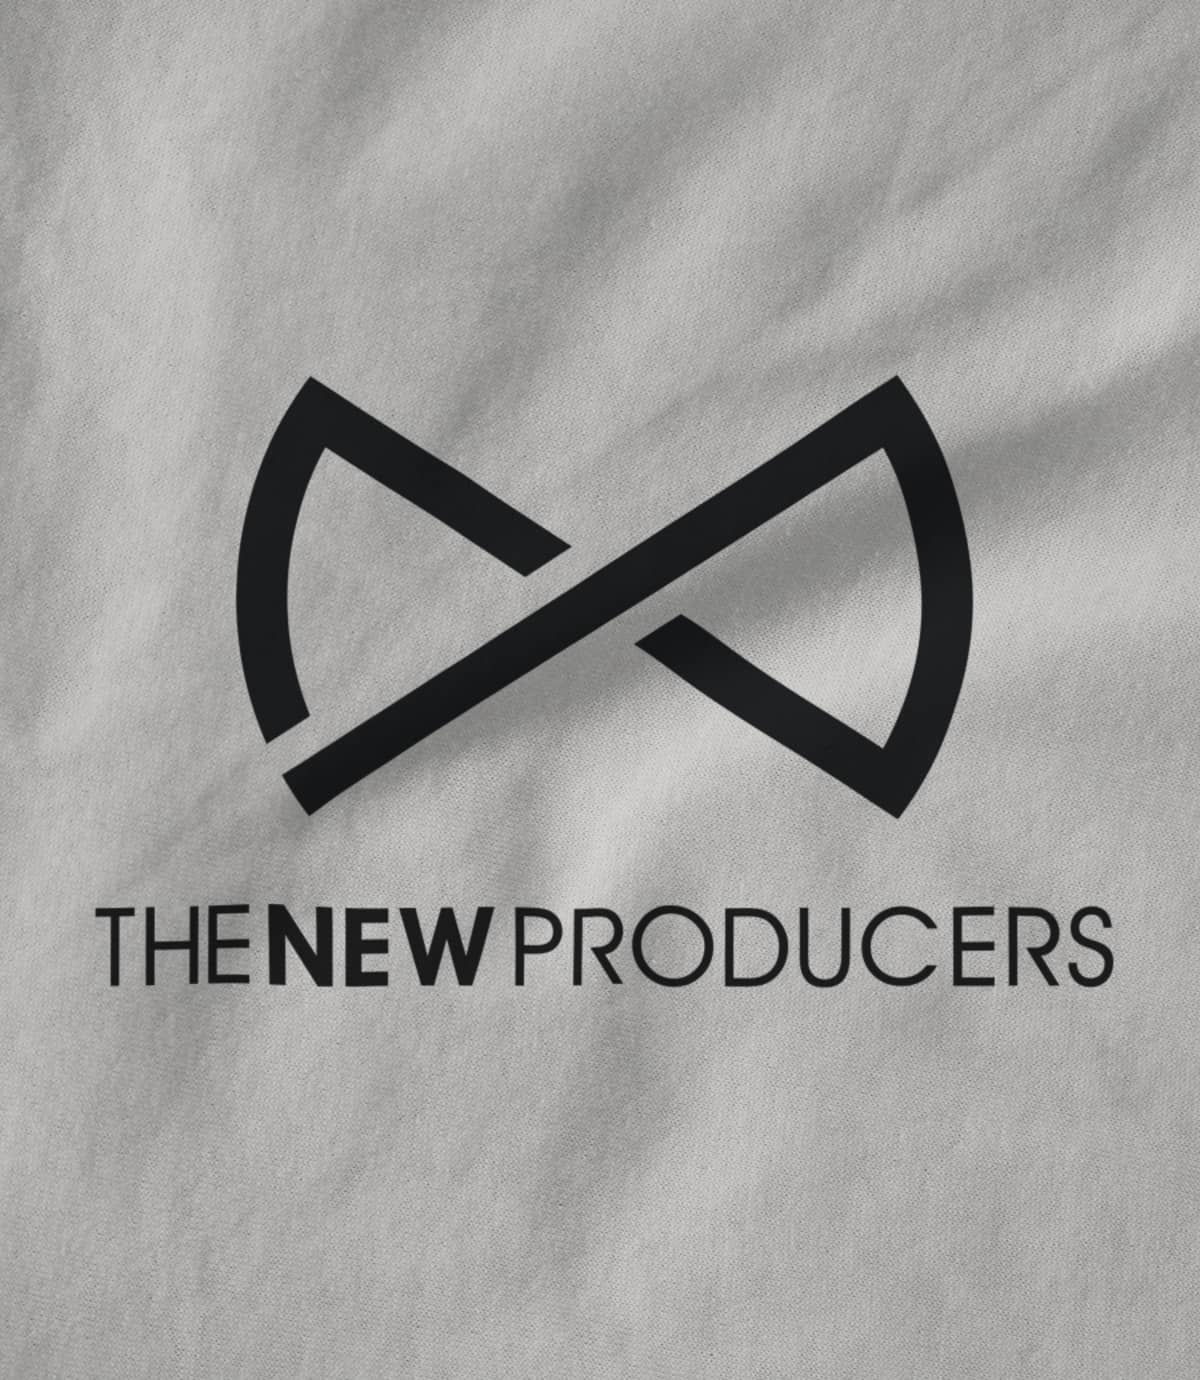 The New Producers